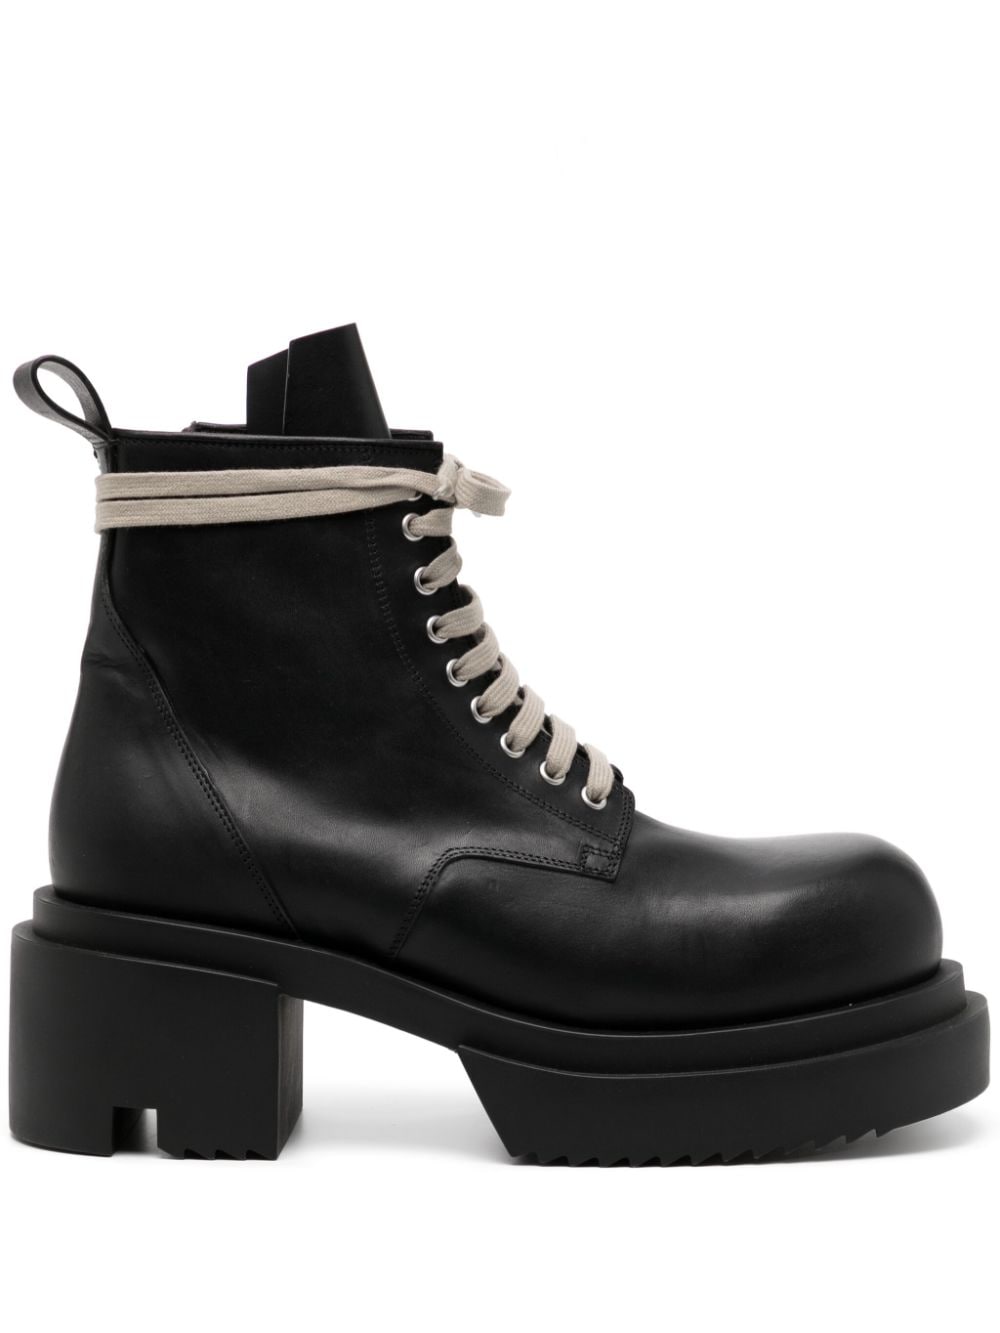 lace-up leather boots